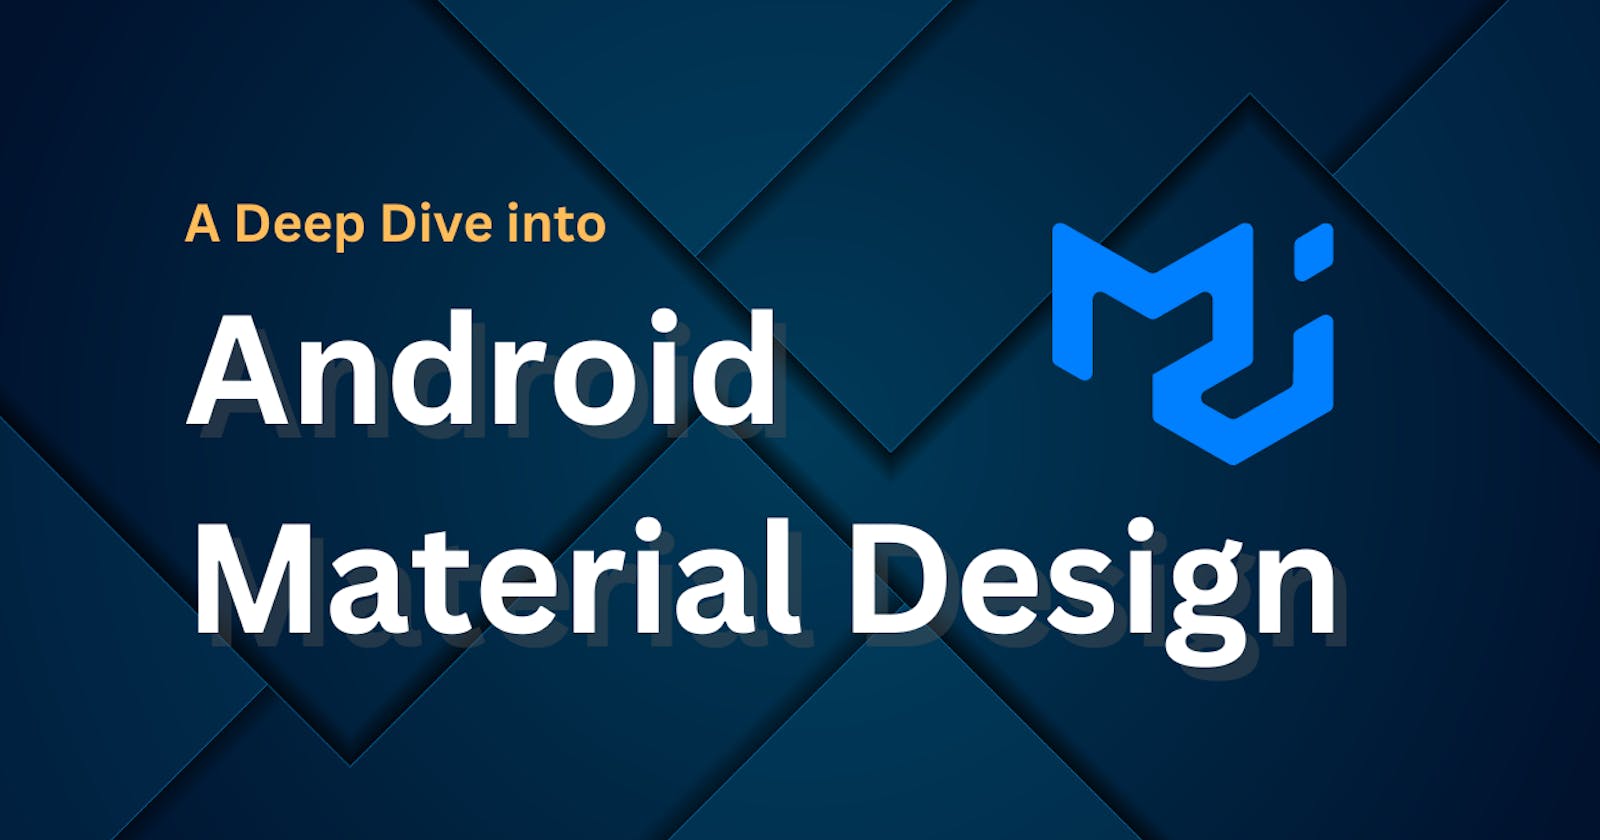 Embracing Modern Aesthetics: A Deep Dive into Android Material Design